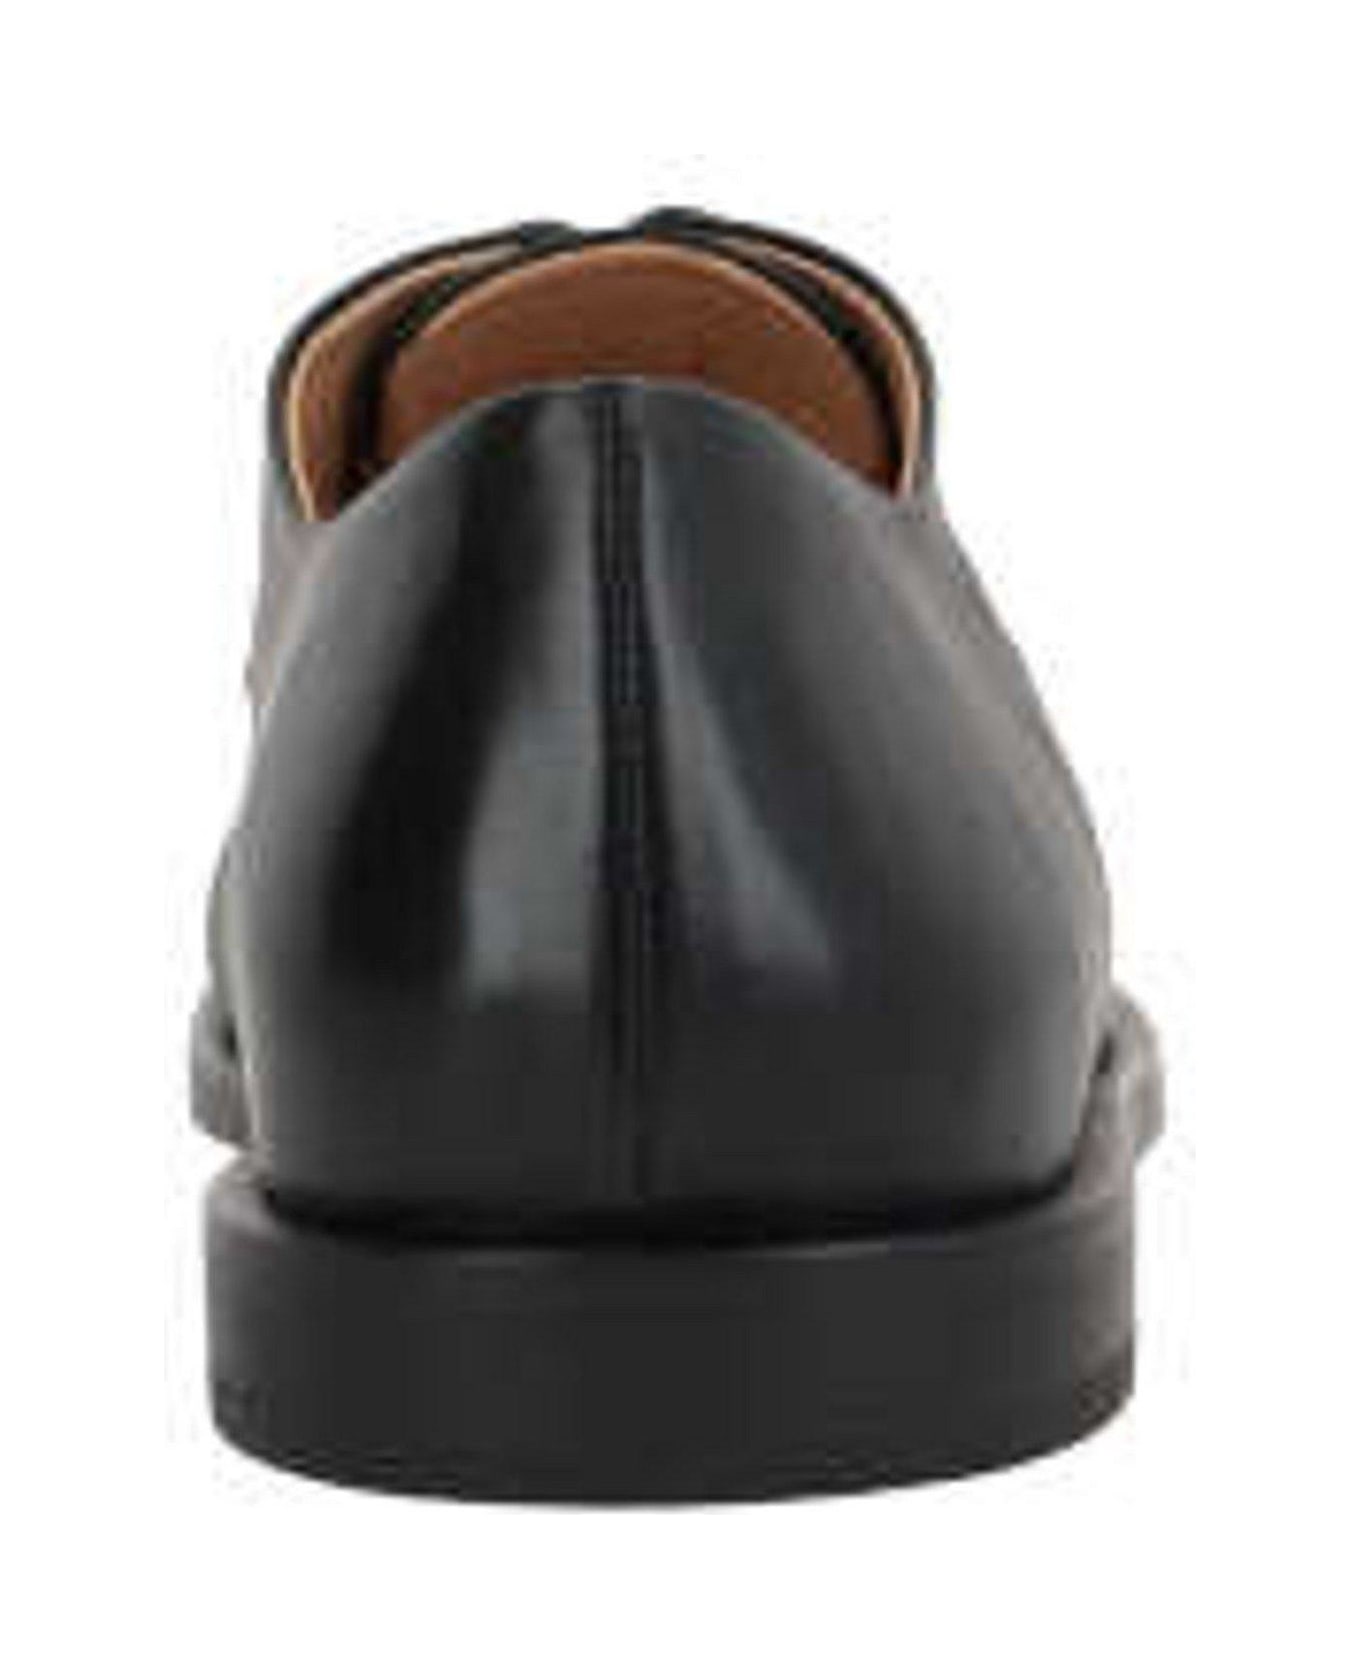 Marsell Almond Toe Mentone Derby Shoes - Nero